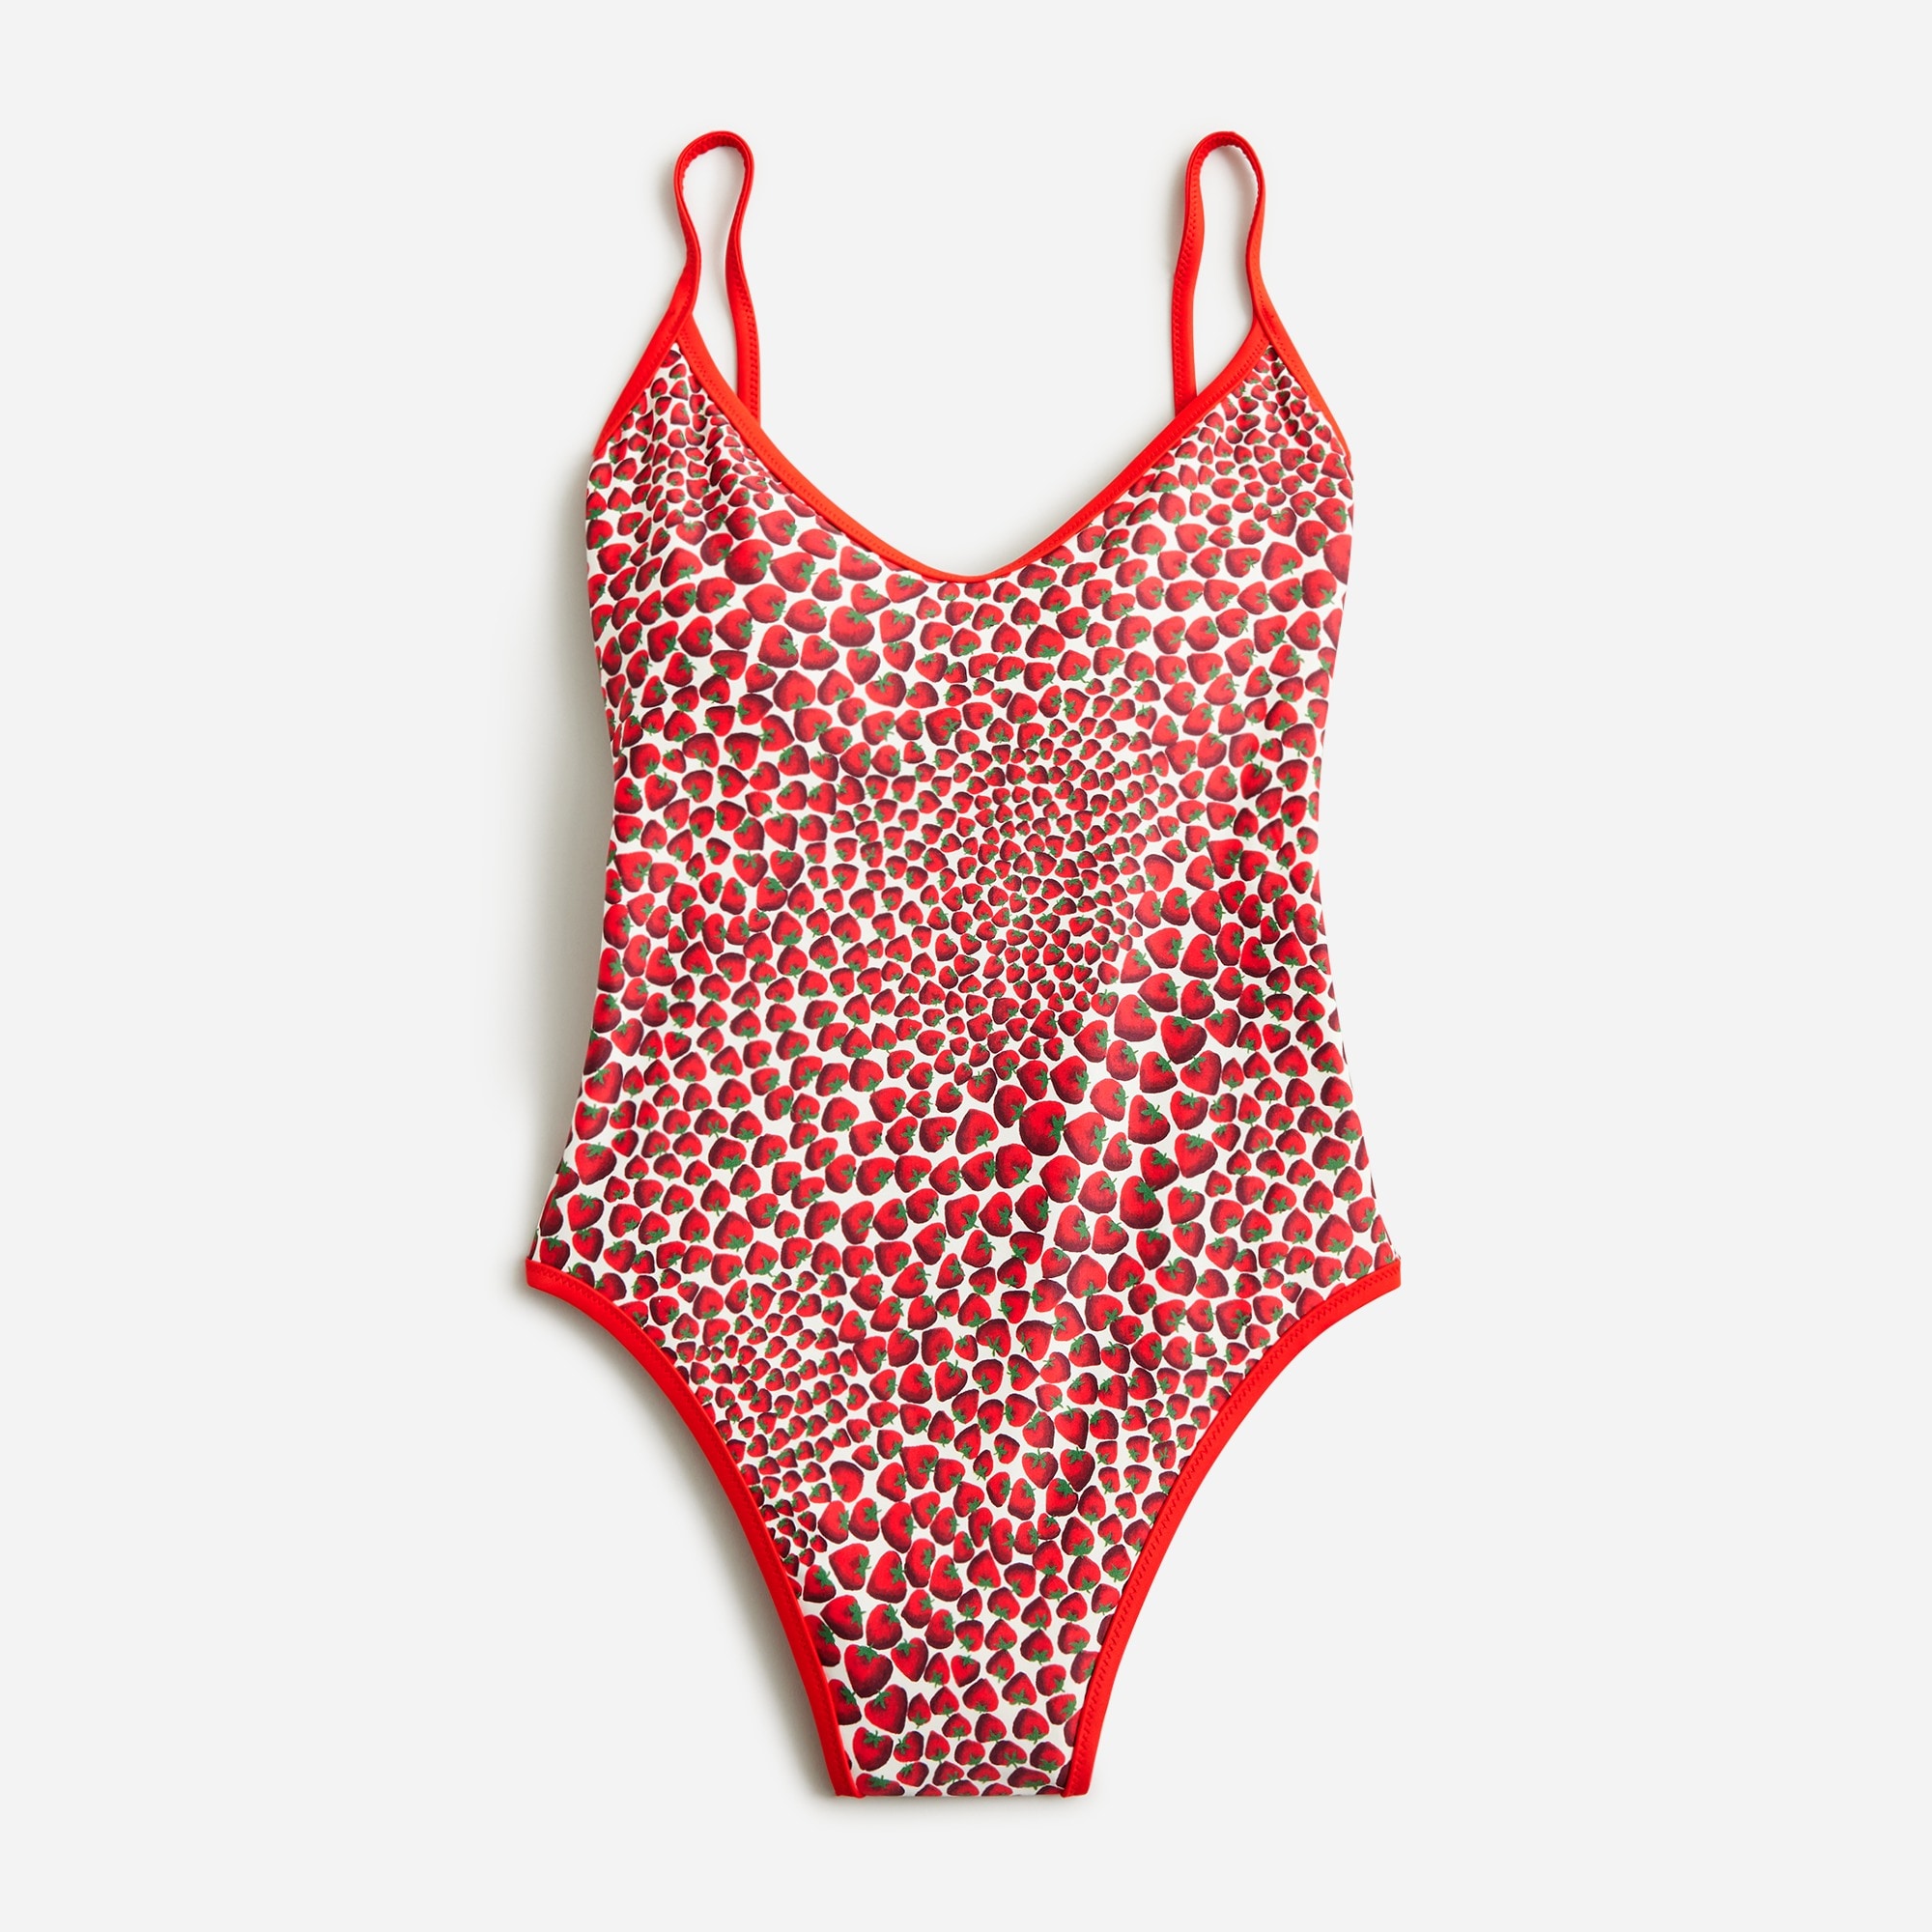  '90s one-piece swimsuit in reversible print